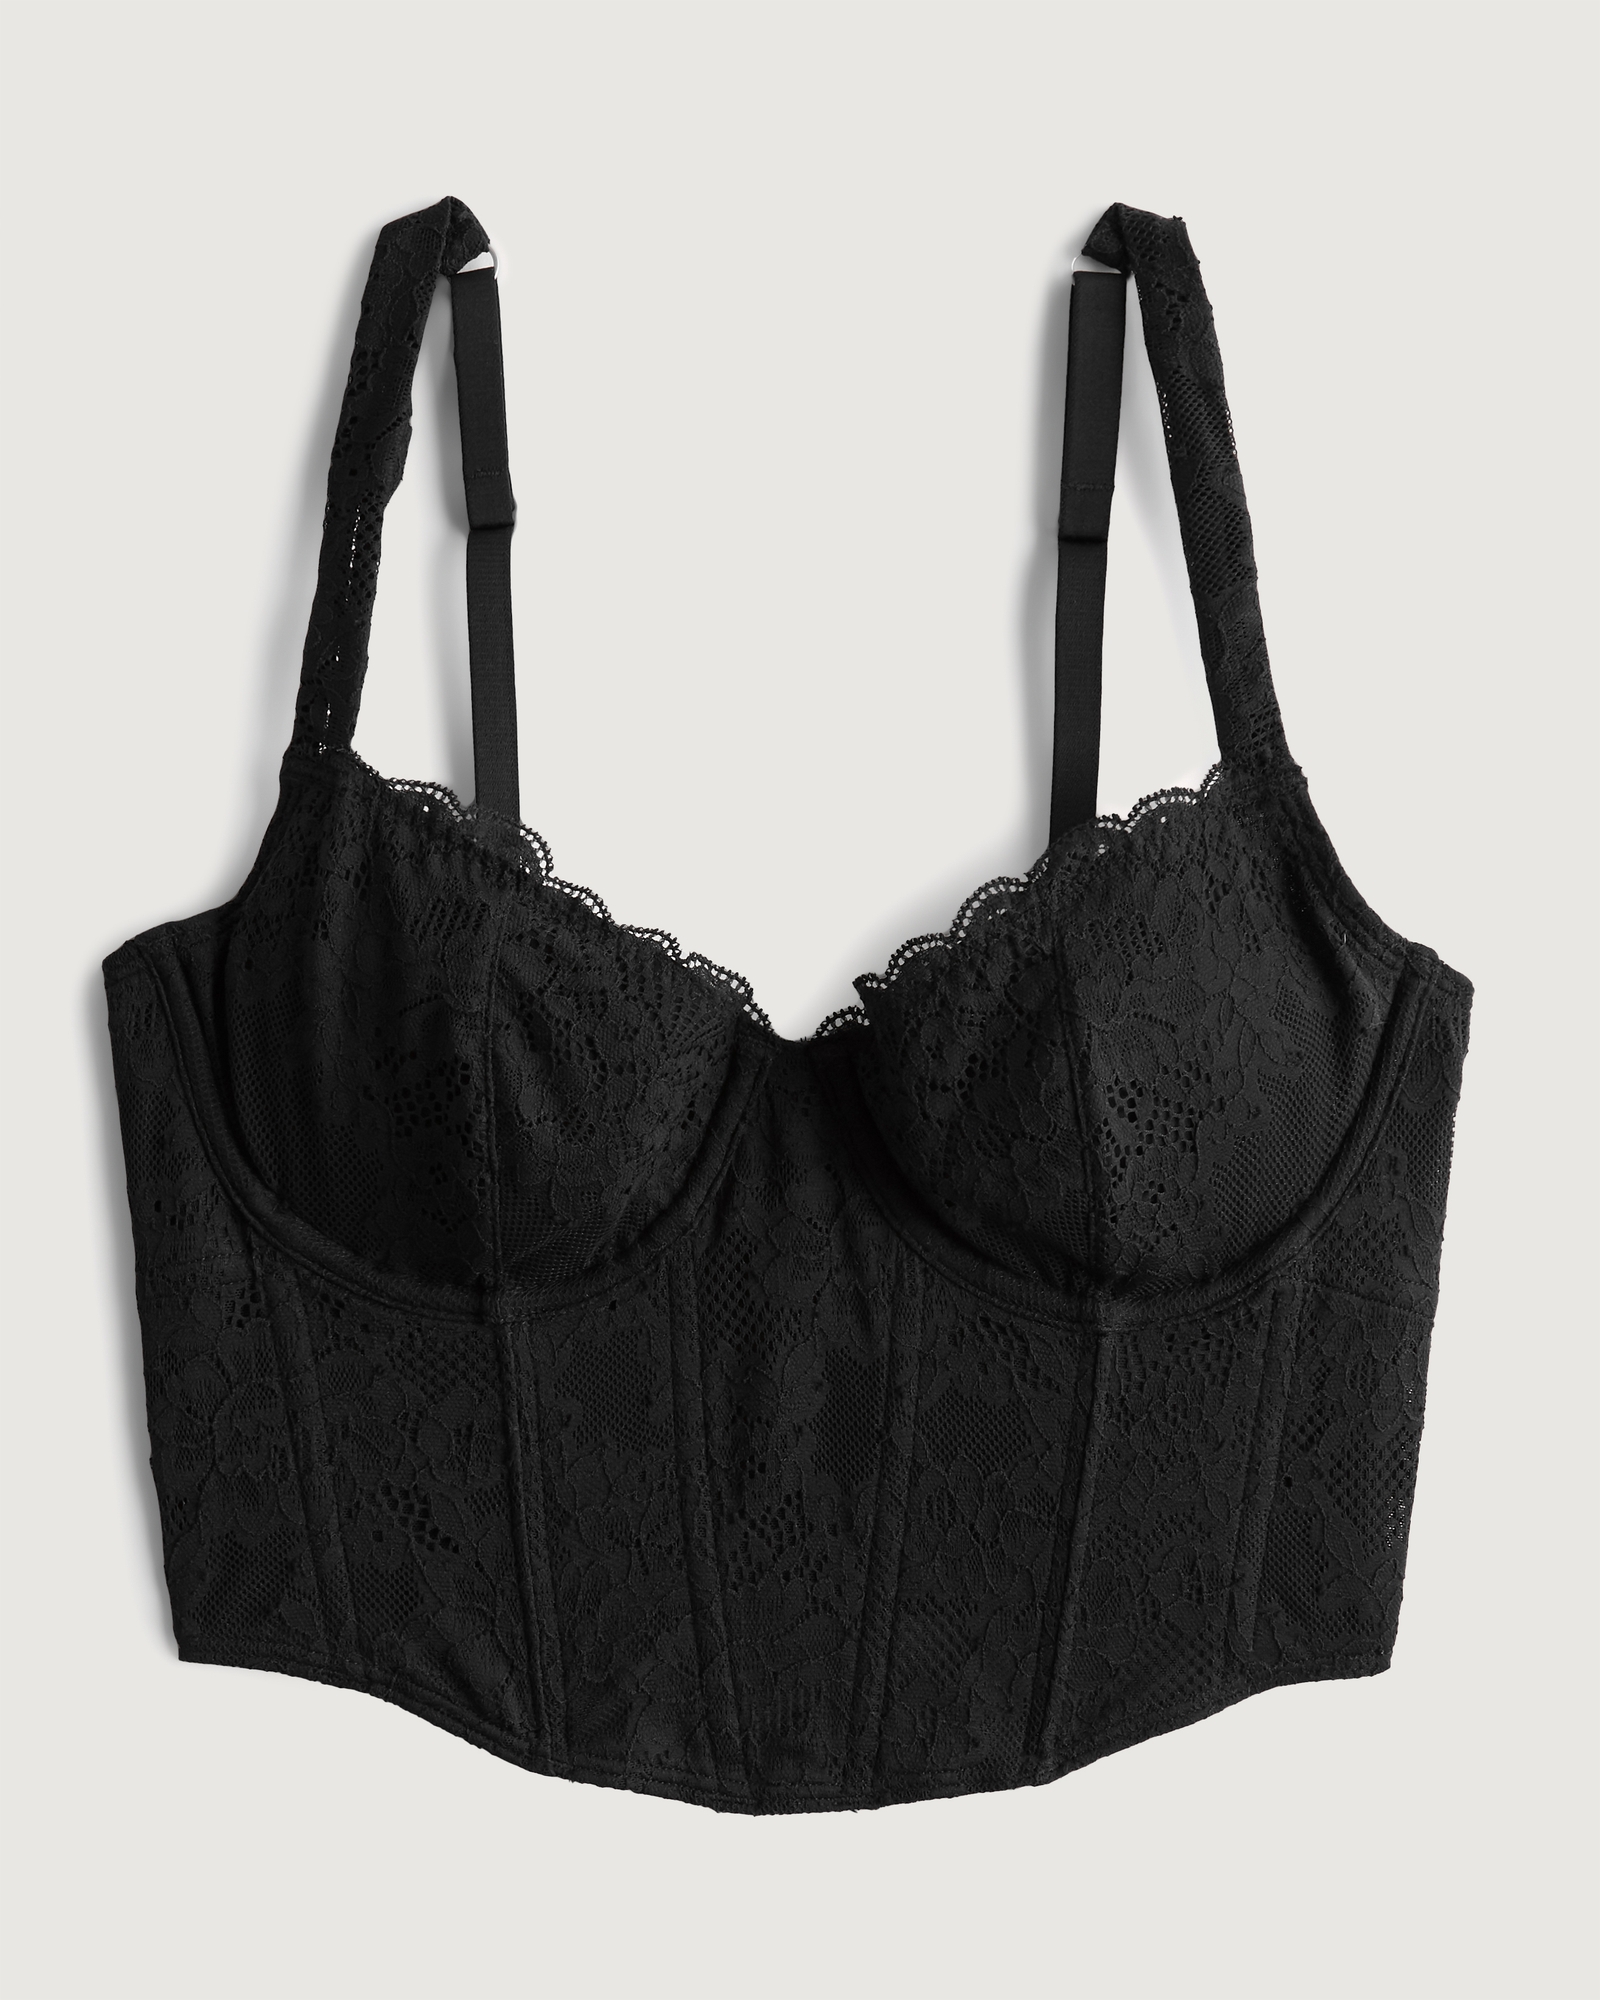 Gilly Hicks core lace halter bralet in black